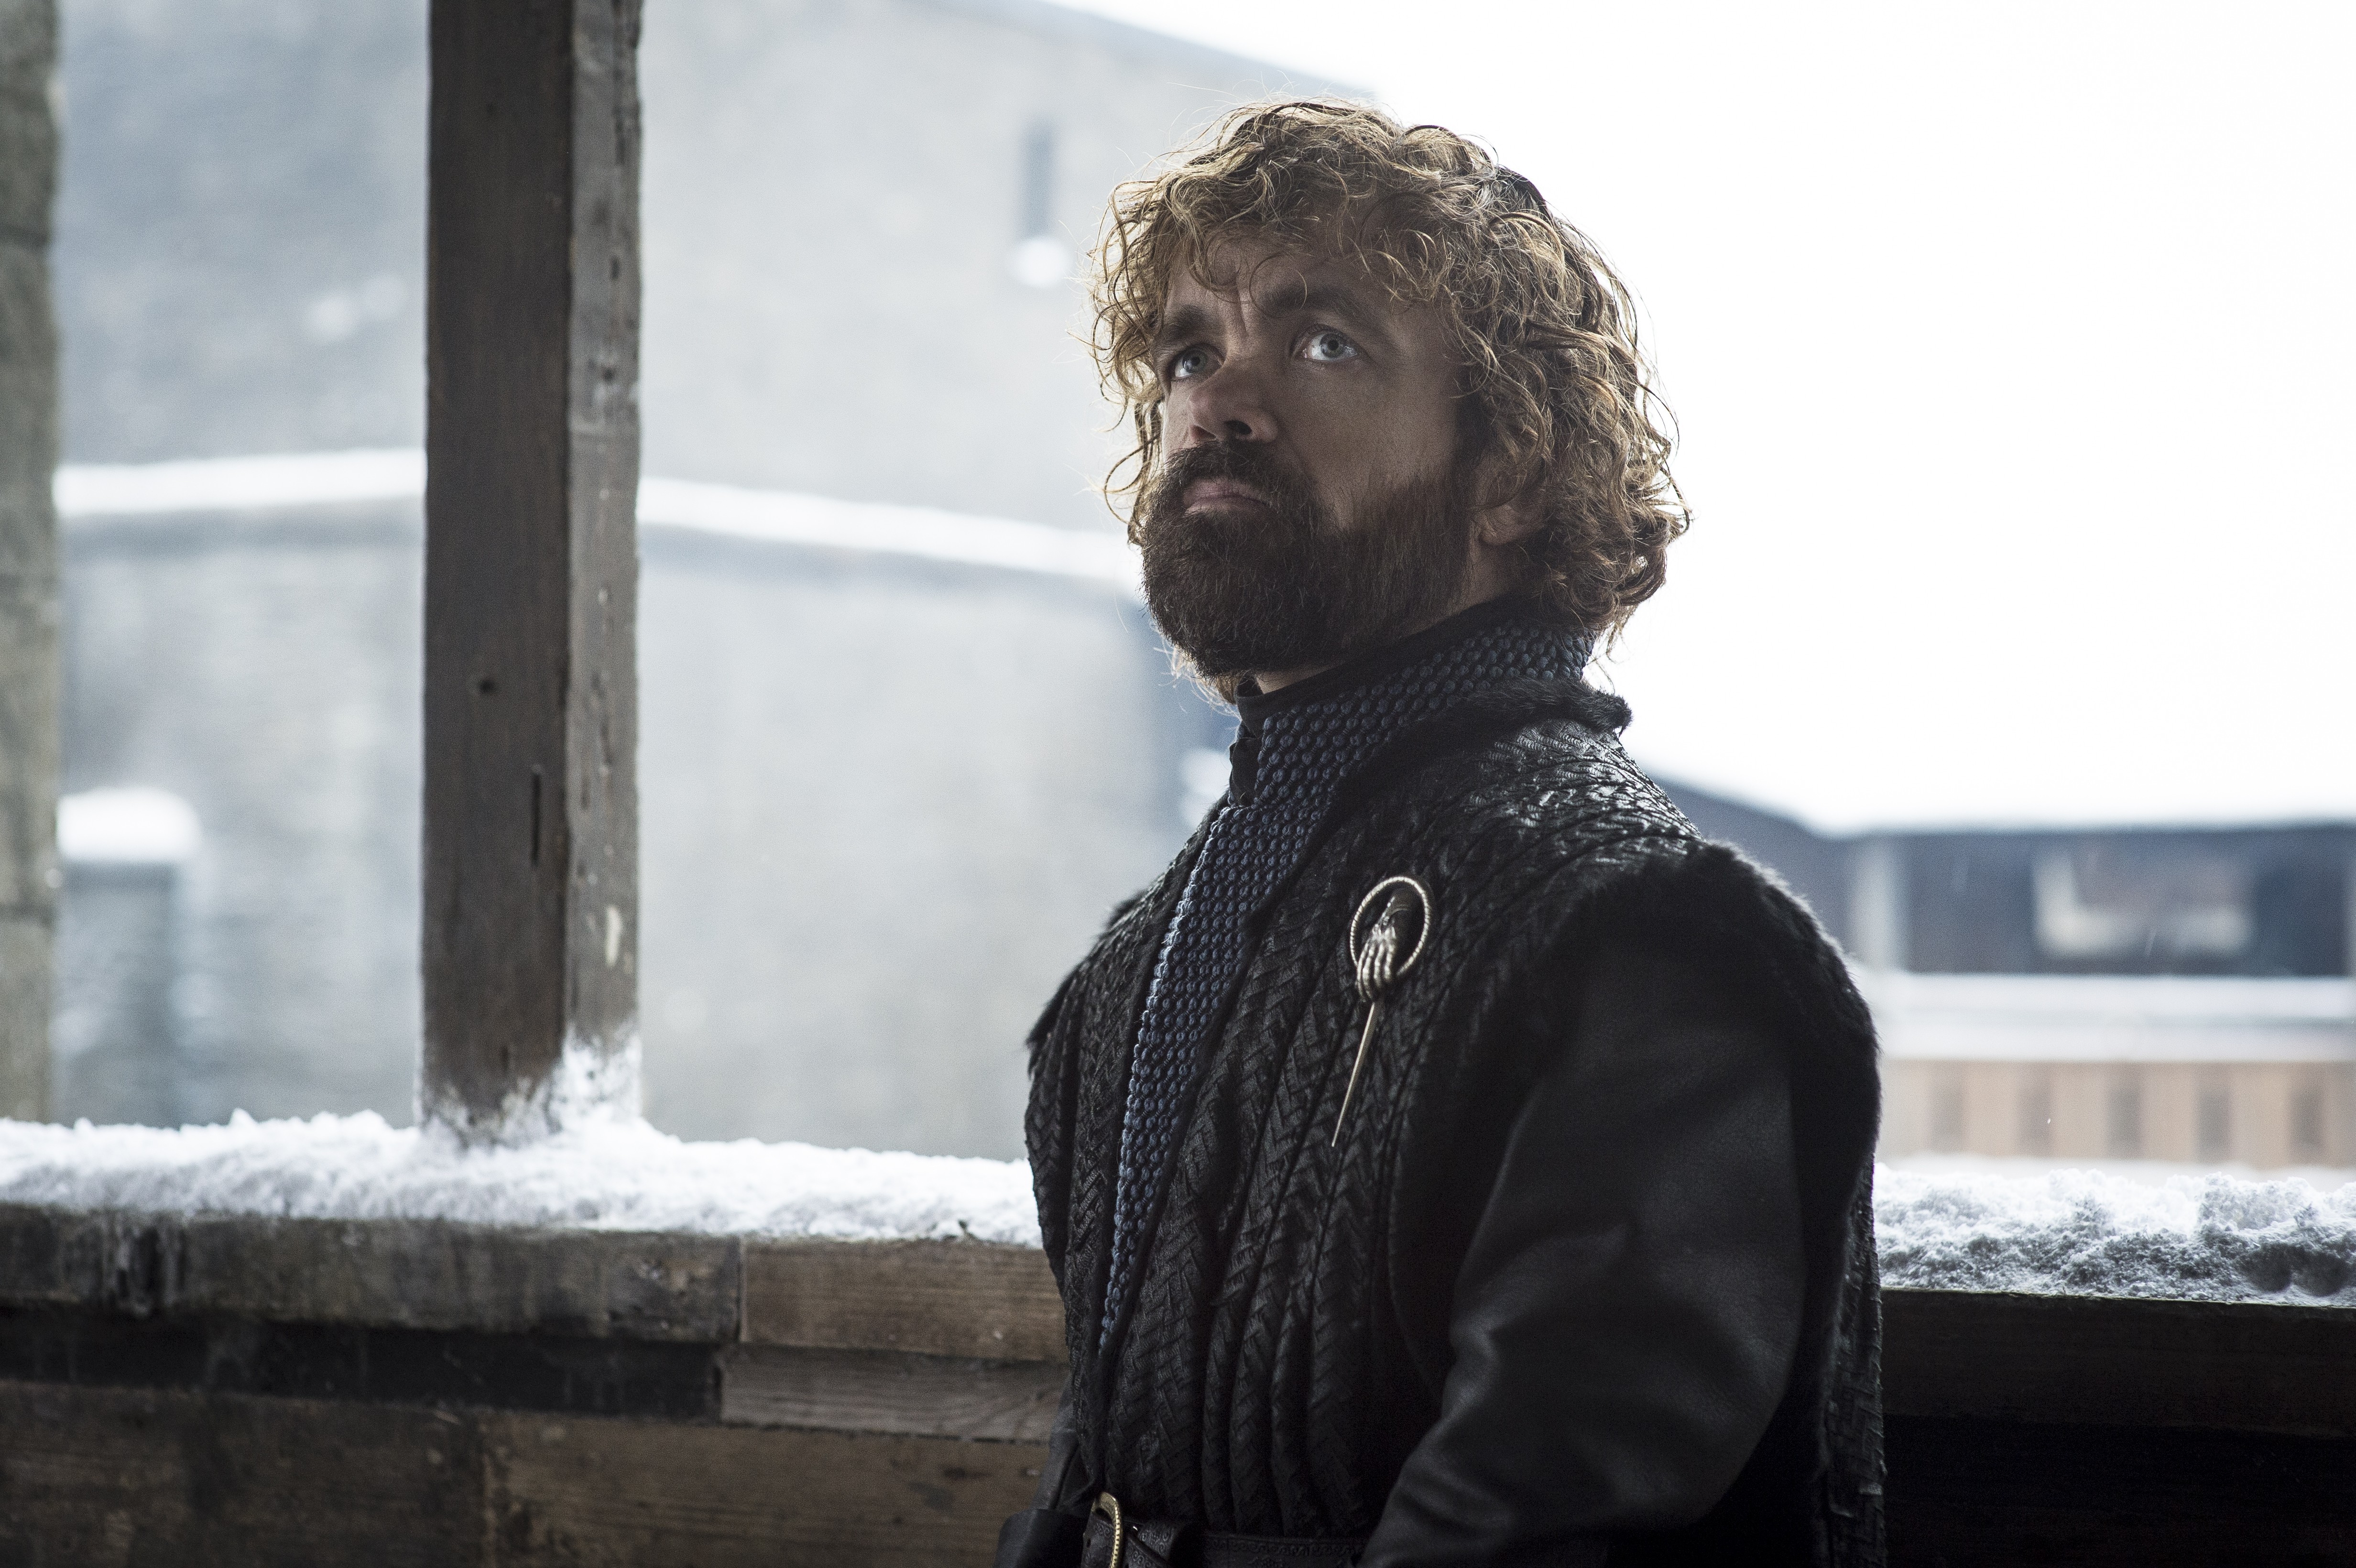 Game Of Thrones Peter Dinklage Tyrion Lannister 4928x3280